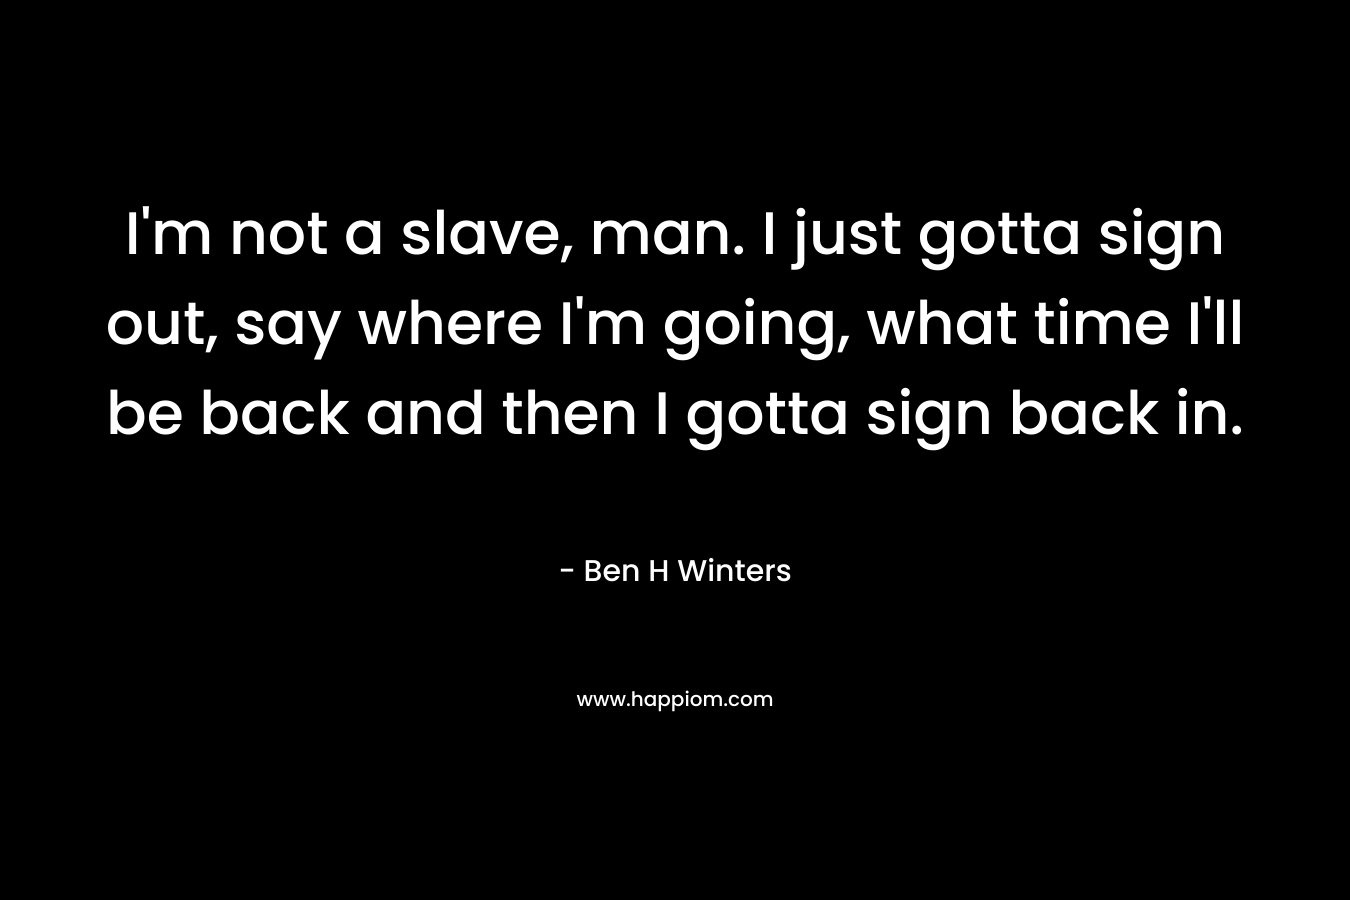 I’m not a slave, man. I just gotta sign out, say where I’m going, what time I’ll be back and then I gotta sign back in. – Ben H Winters